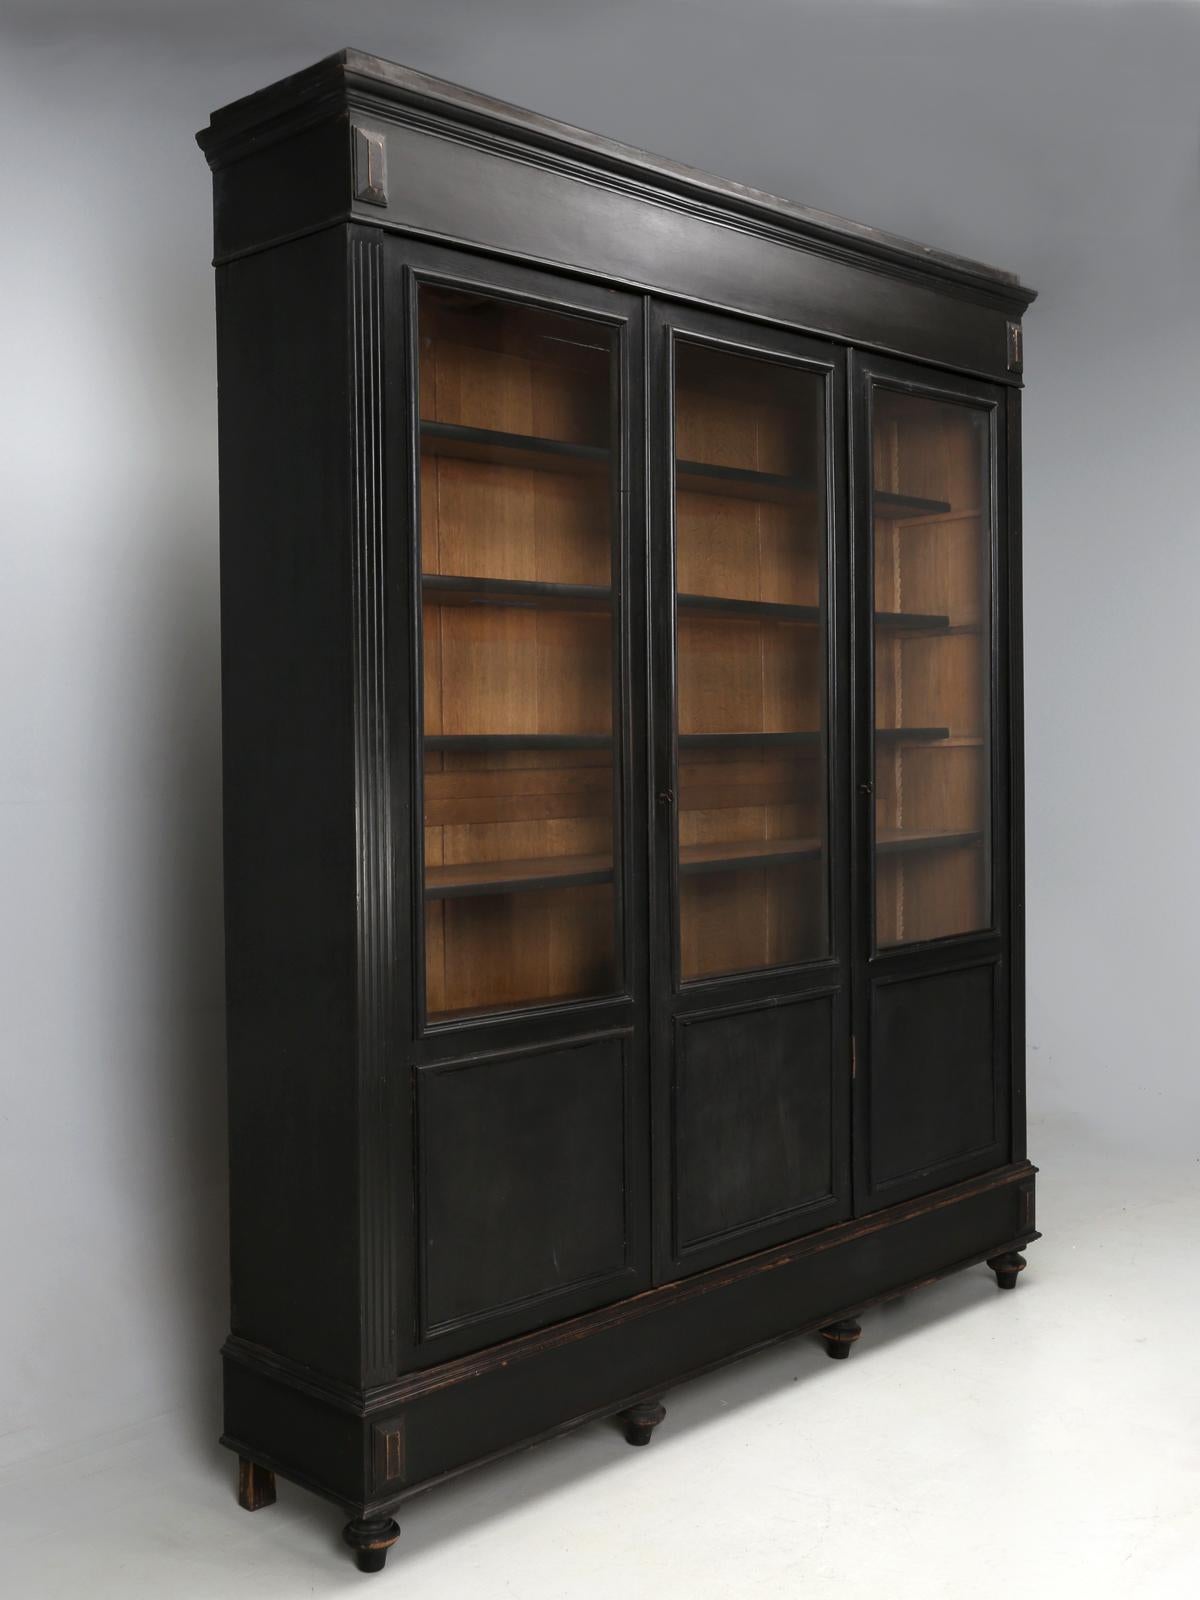 This is an unrestored, antique French bookcase, presented exactly how it looked in the late 1800s, when it was new. Typically, when we see a Napoleon III style black anything, more often than not, some antique dealer, like ourselves, will have